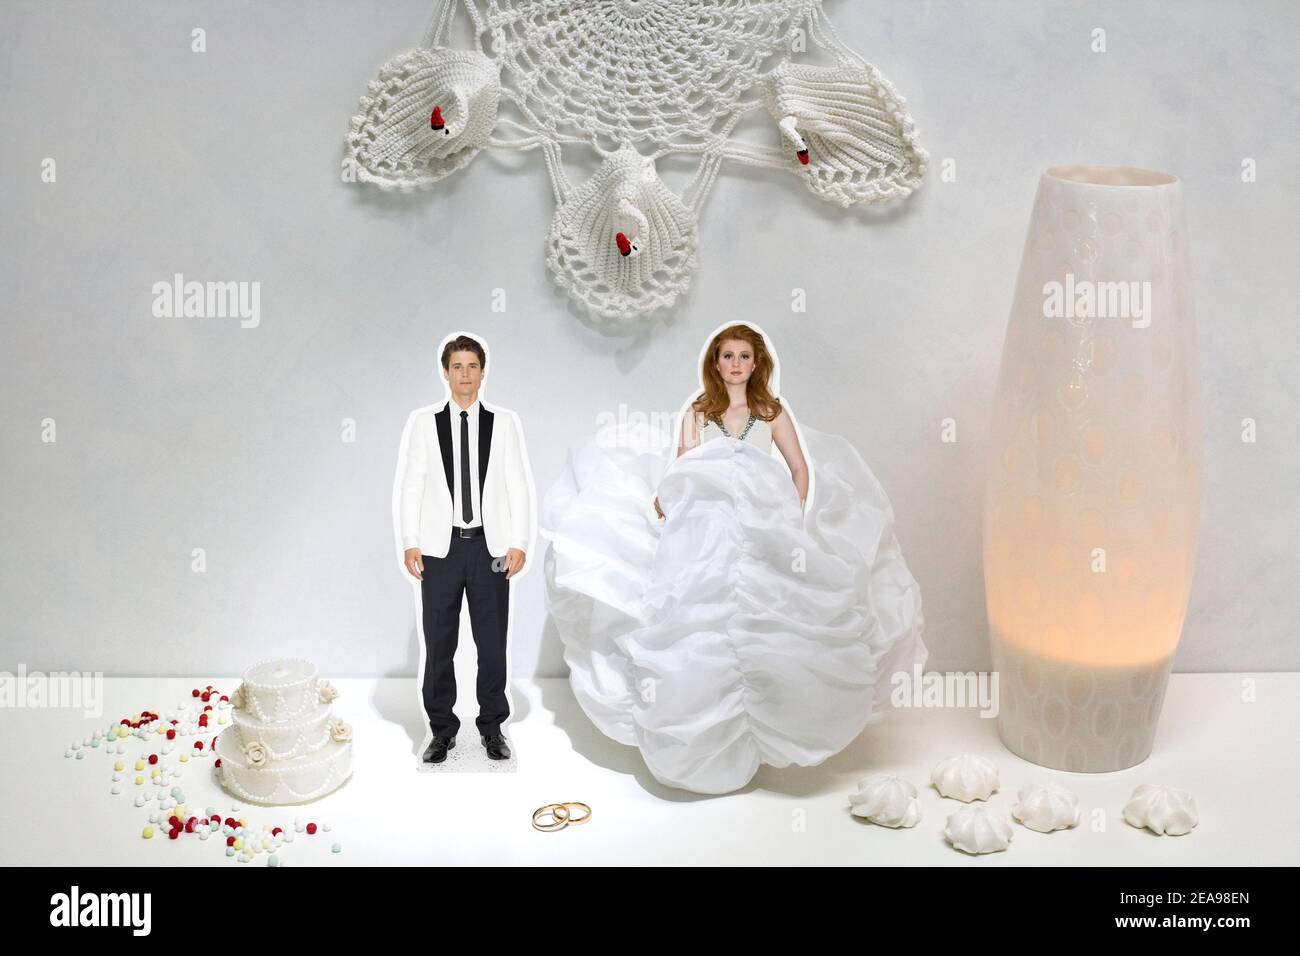 Couple, man and woman, white wedding, wedding cake, cut-out figures, lamp, rings, lucky pearls, wedding dress, wedding suit, white, luminous lamp, collage Stock Photo